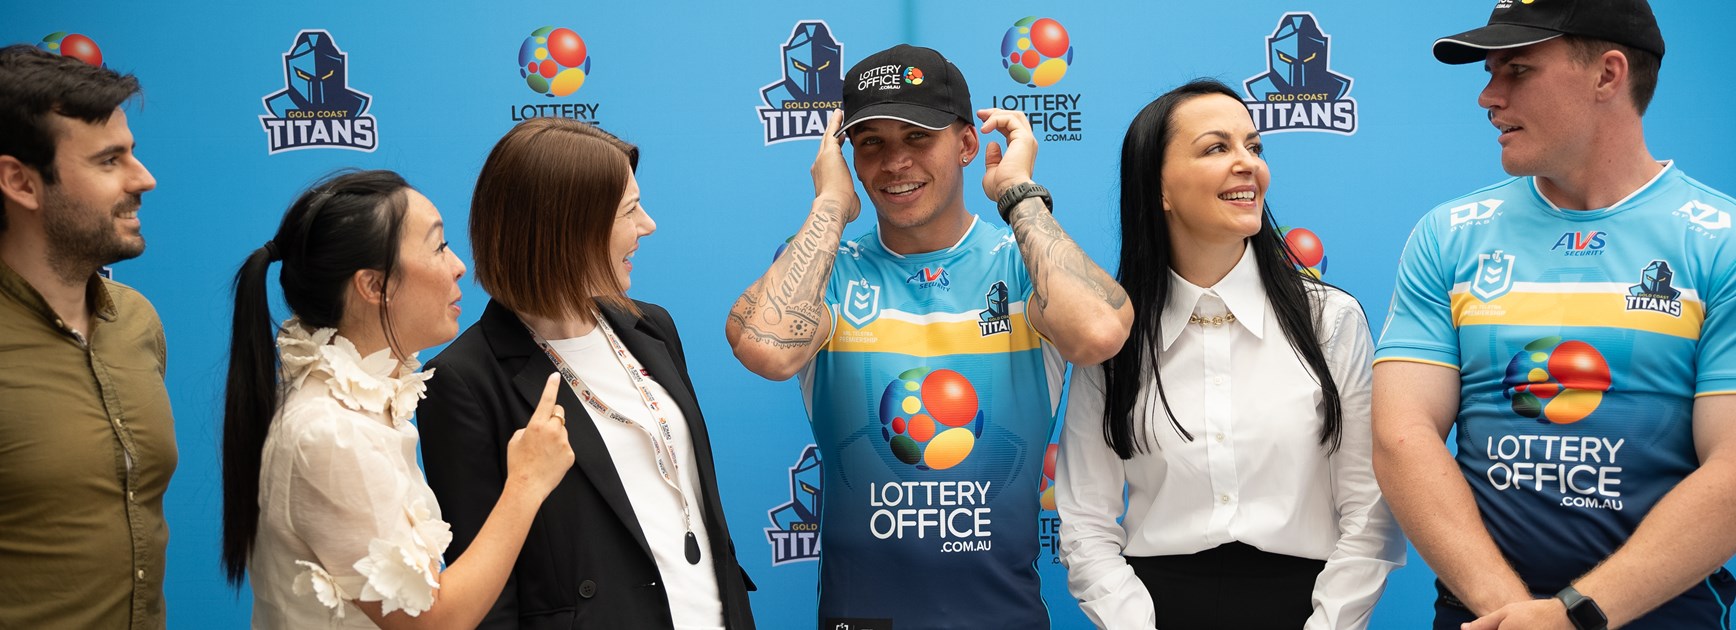 Titans launch The Lottery Office partnership